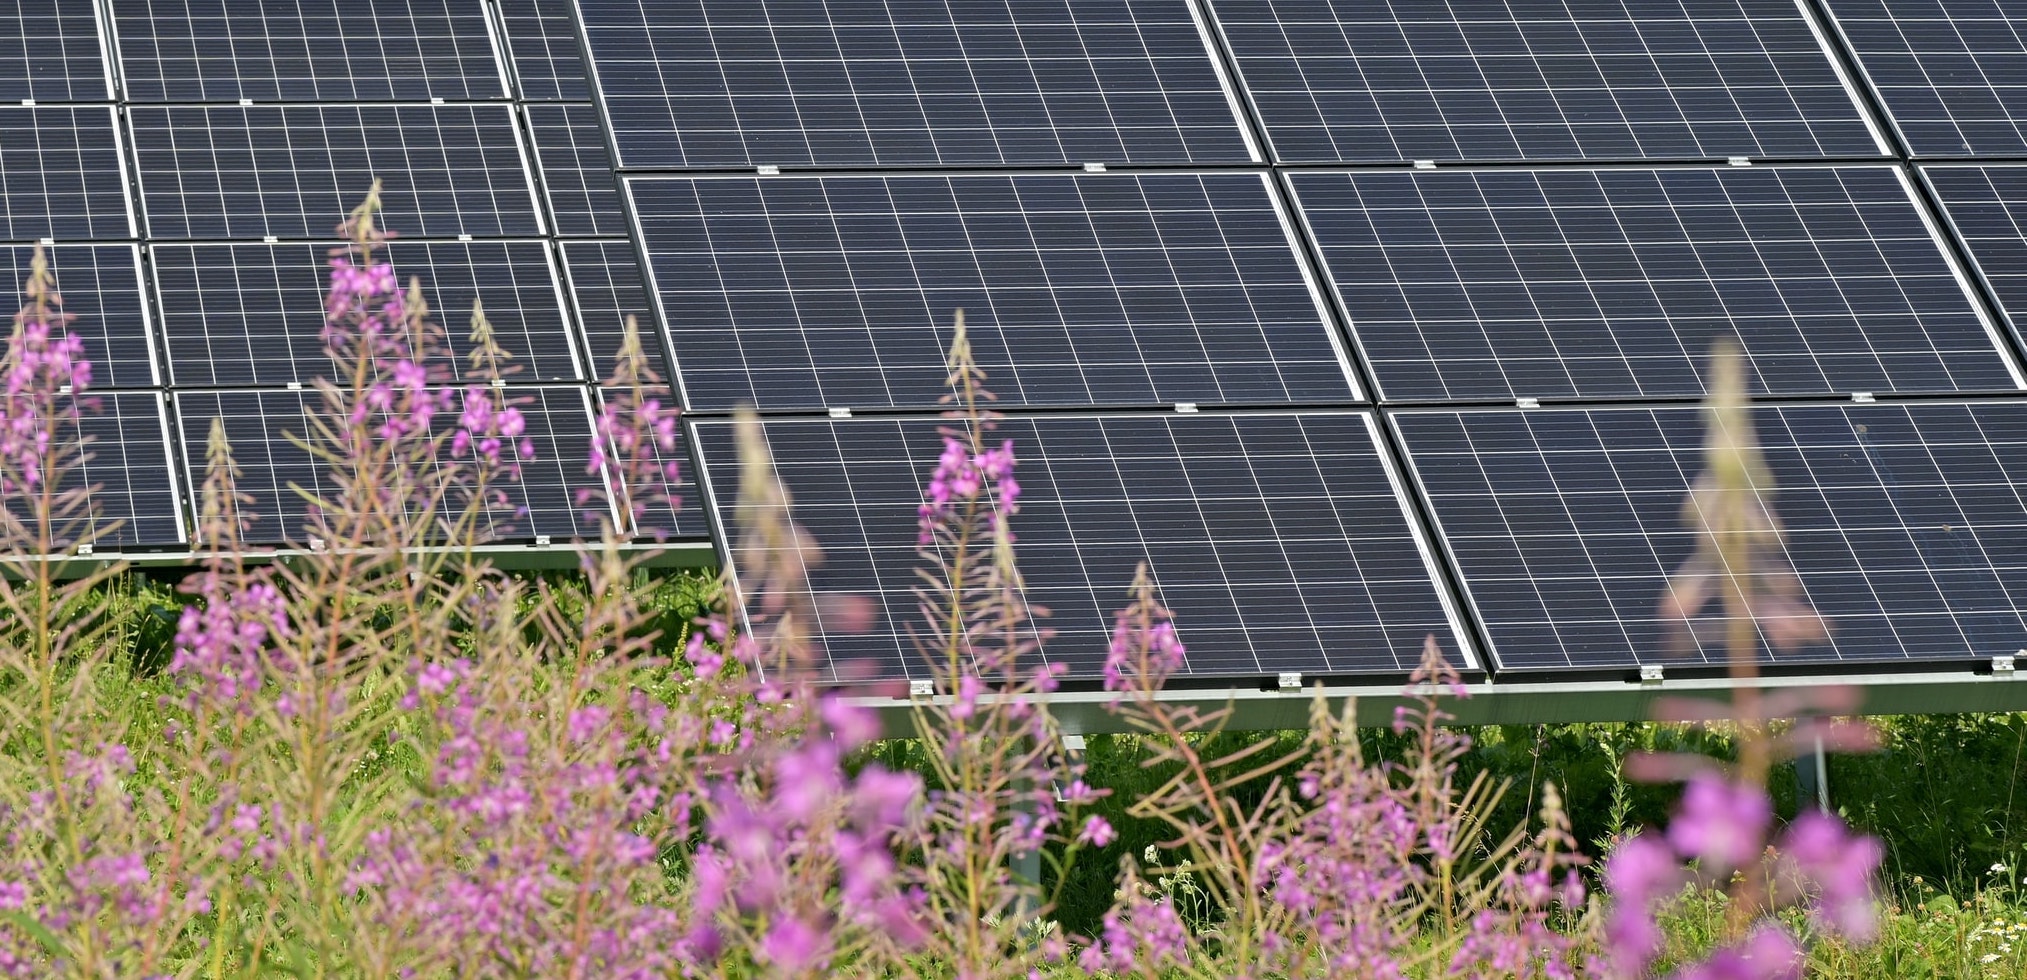 Solar panels with pink wildflowers in the foreground